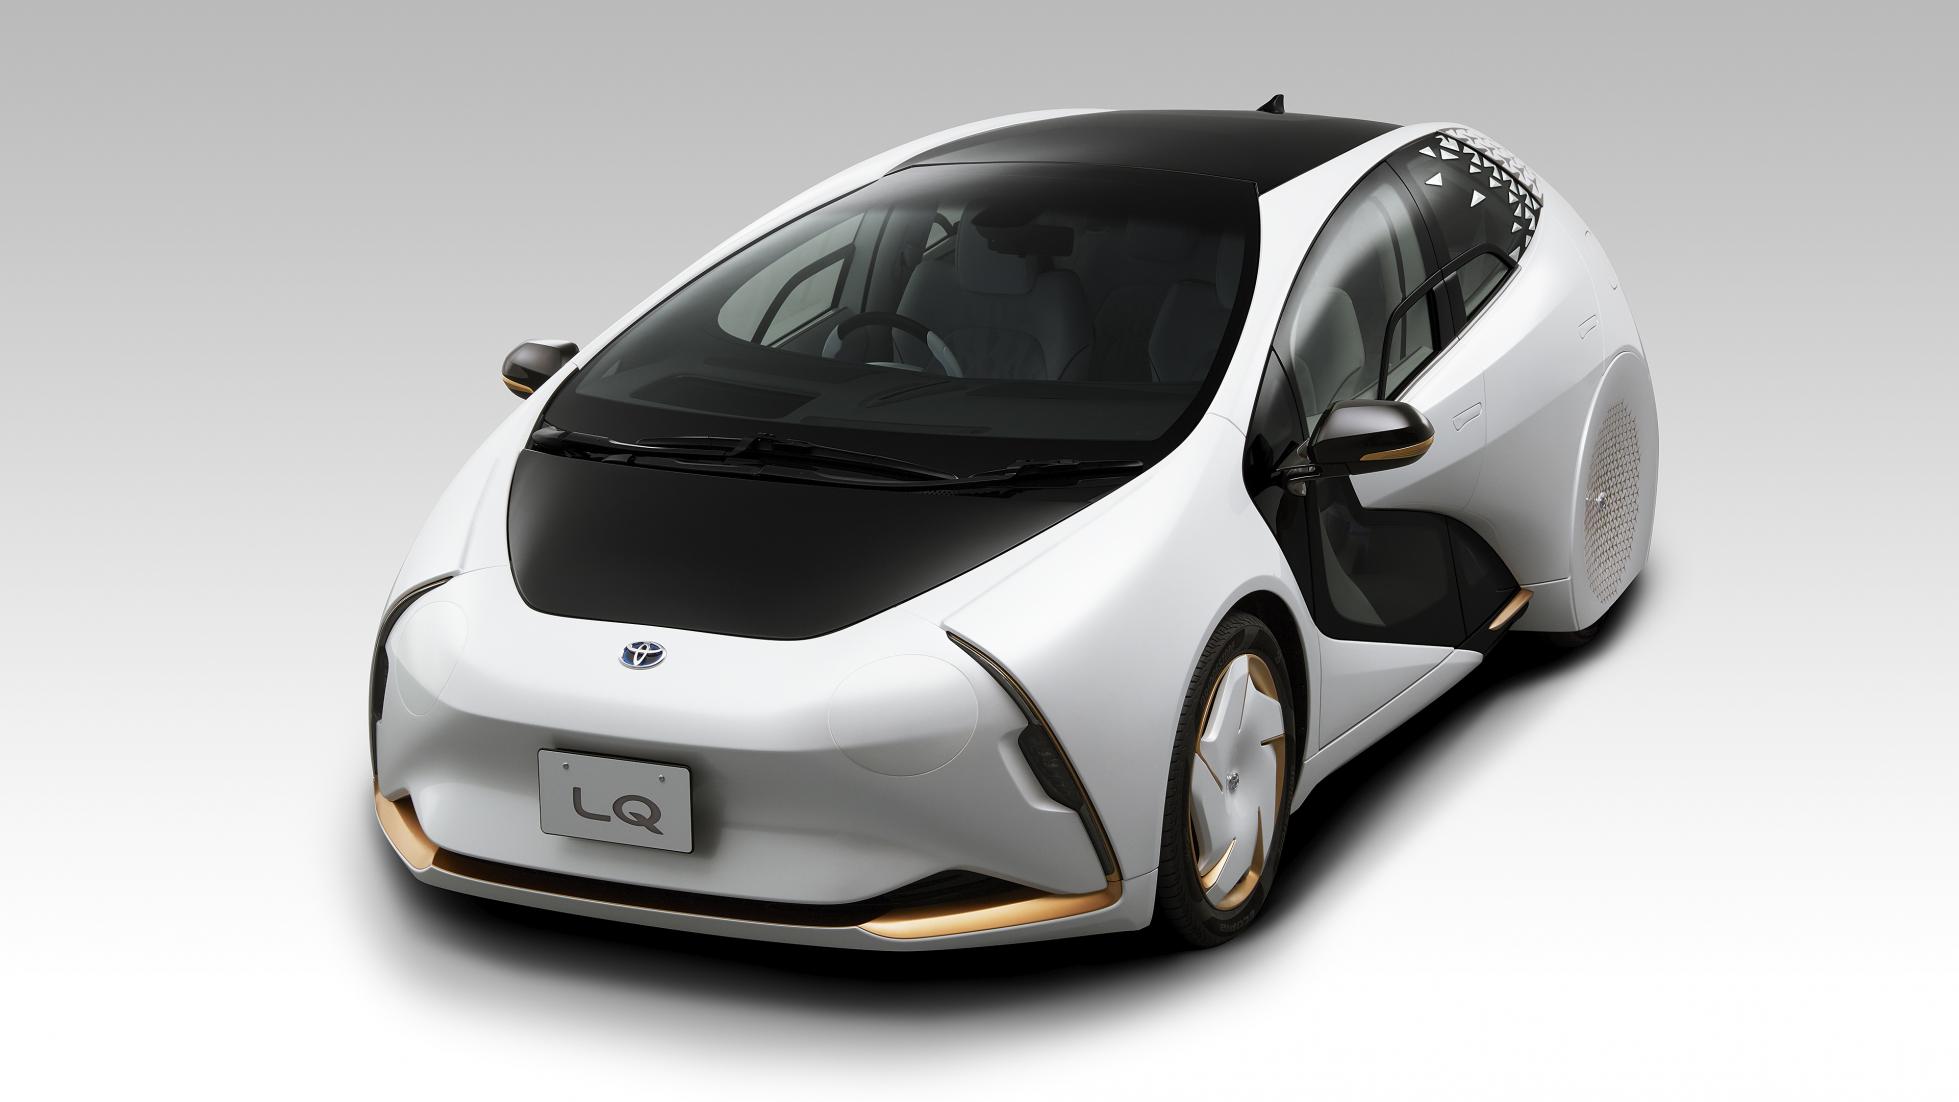 Toyota’s LQ Concept wants to get to know you